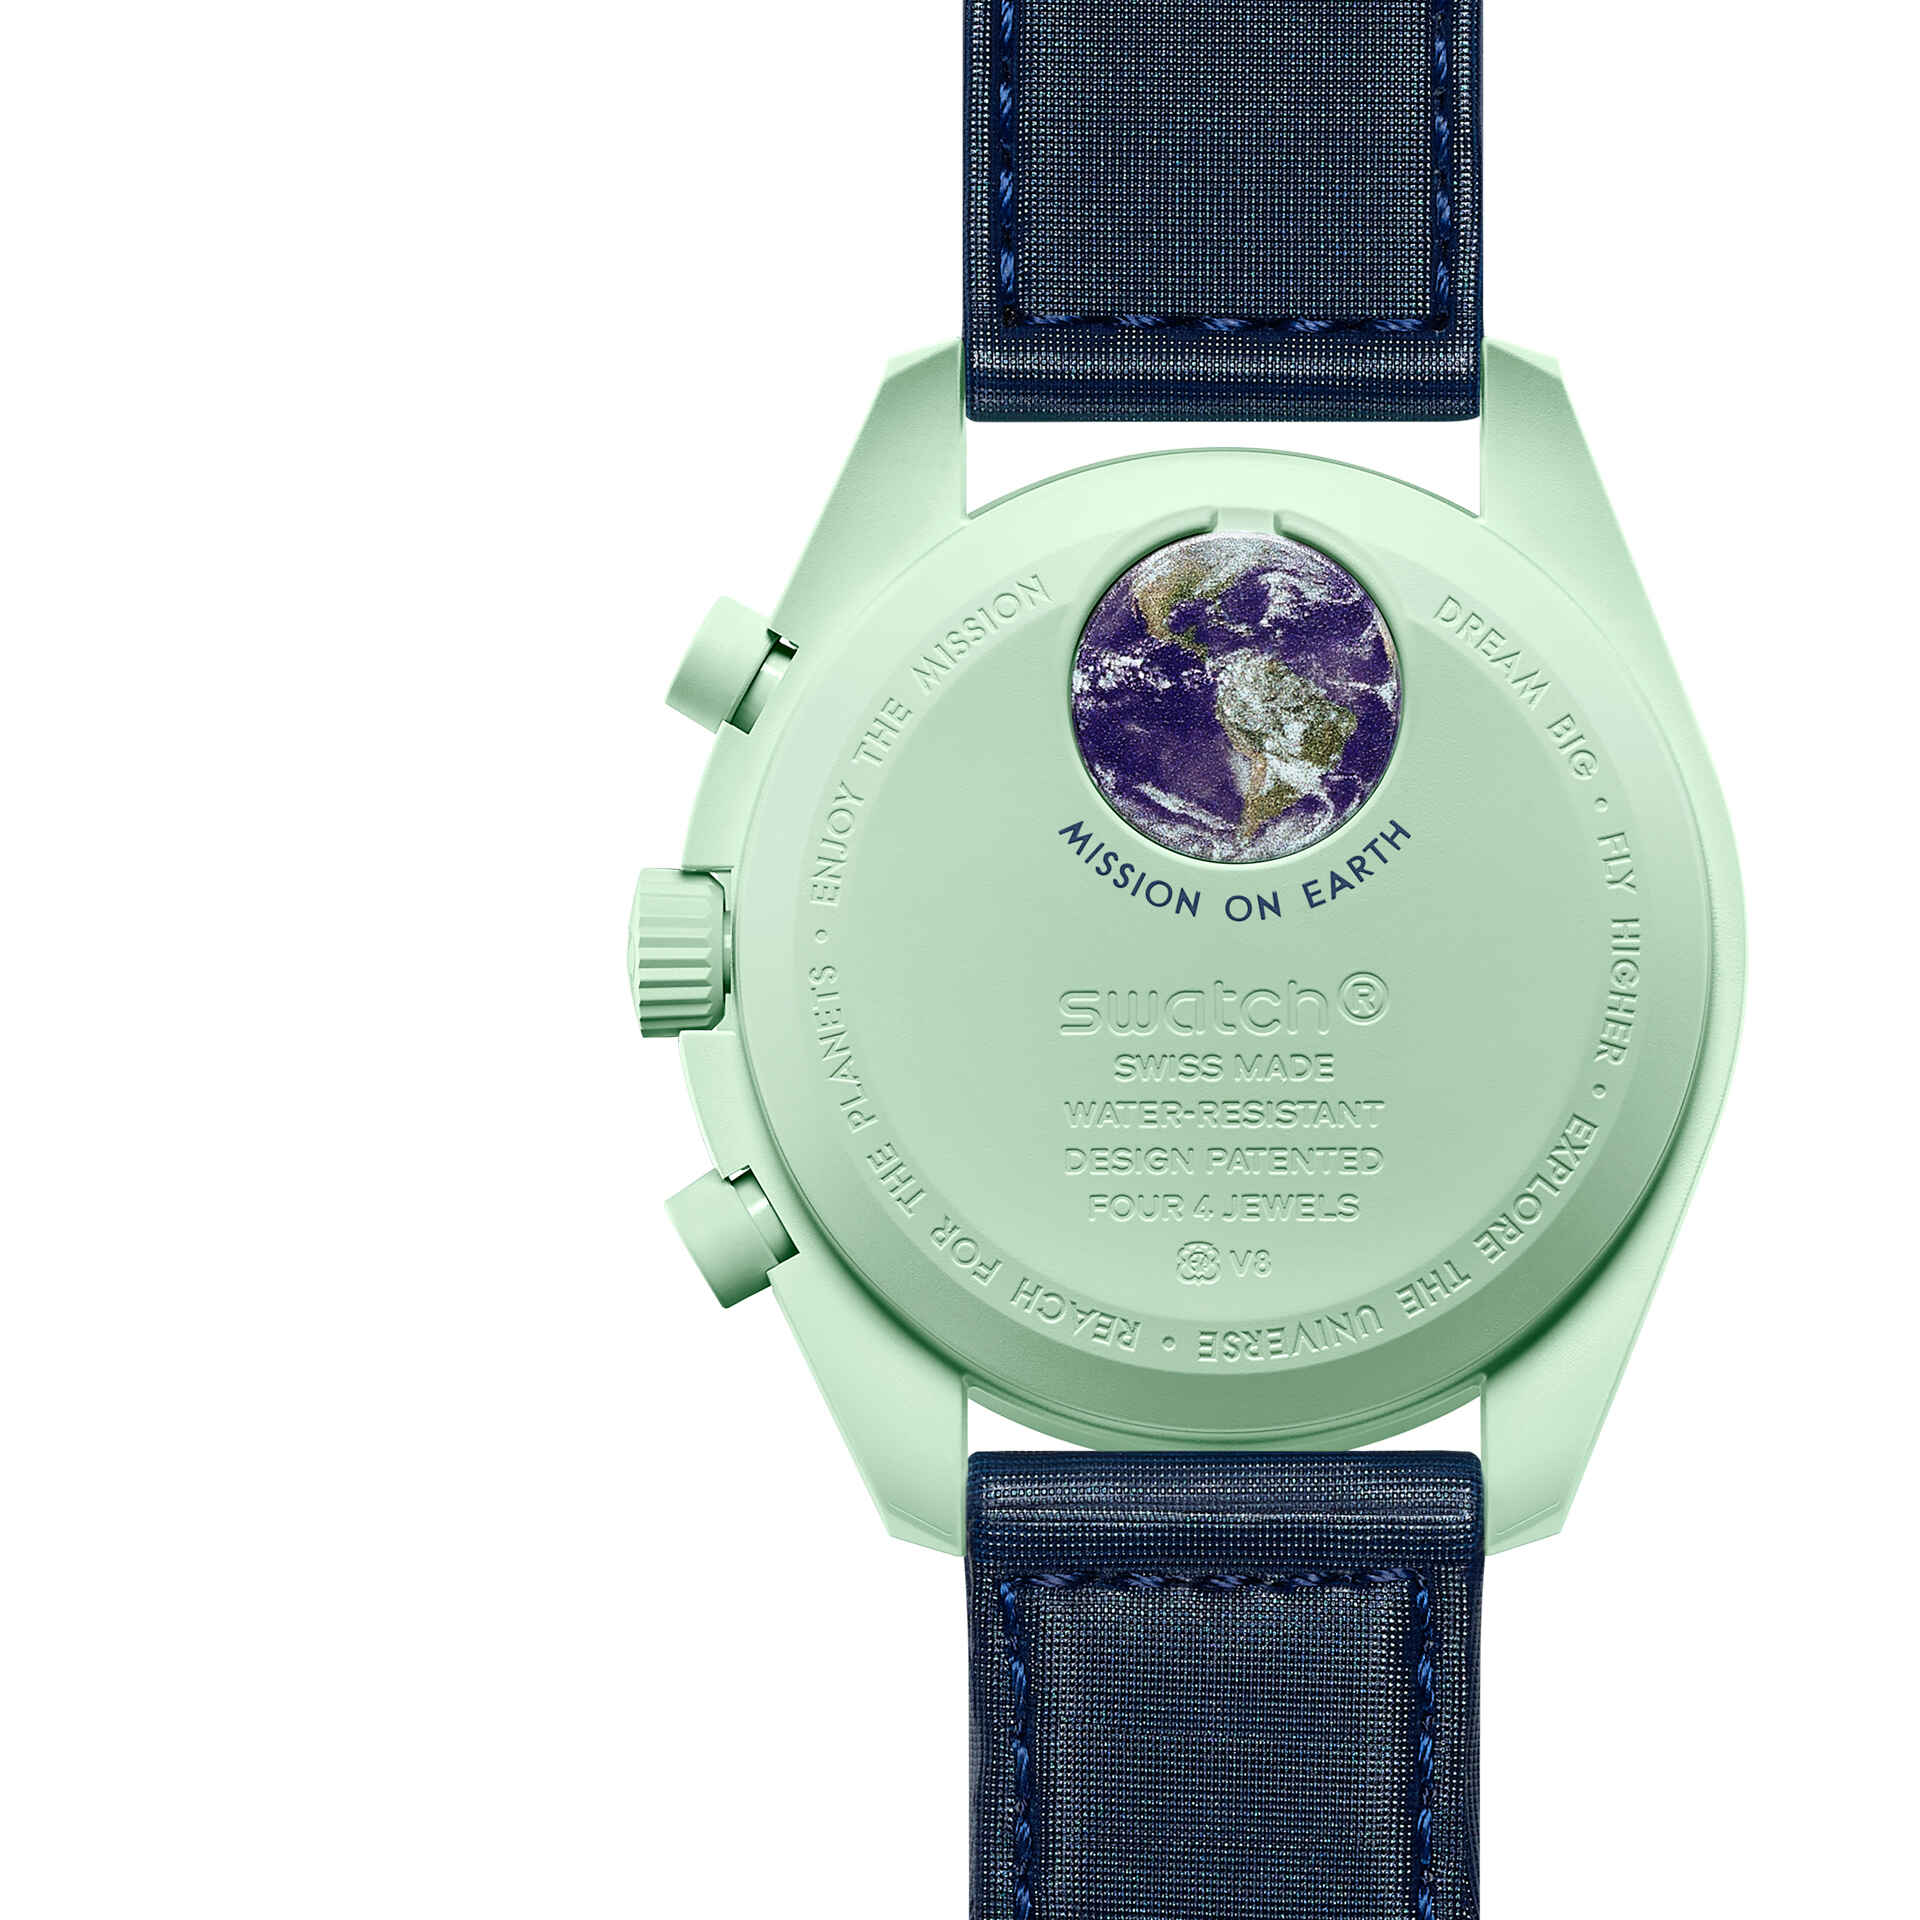 Swatch Omega Moonswatch Mission on EARTH